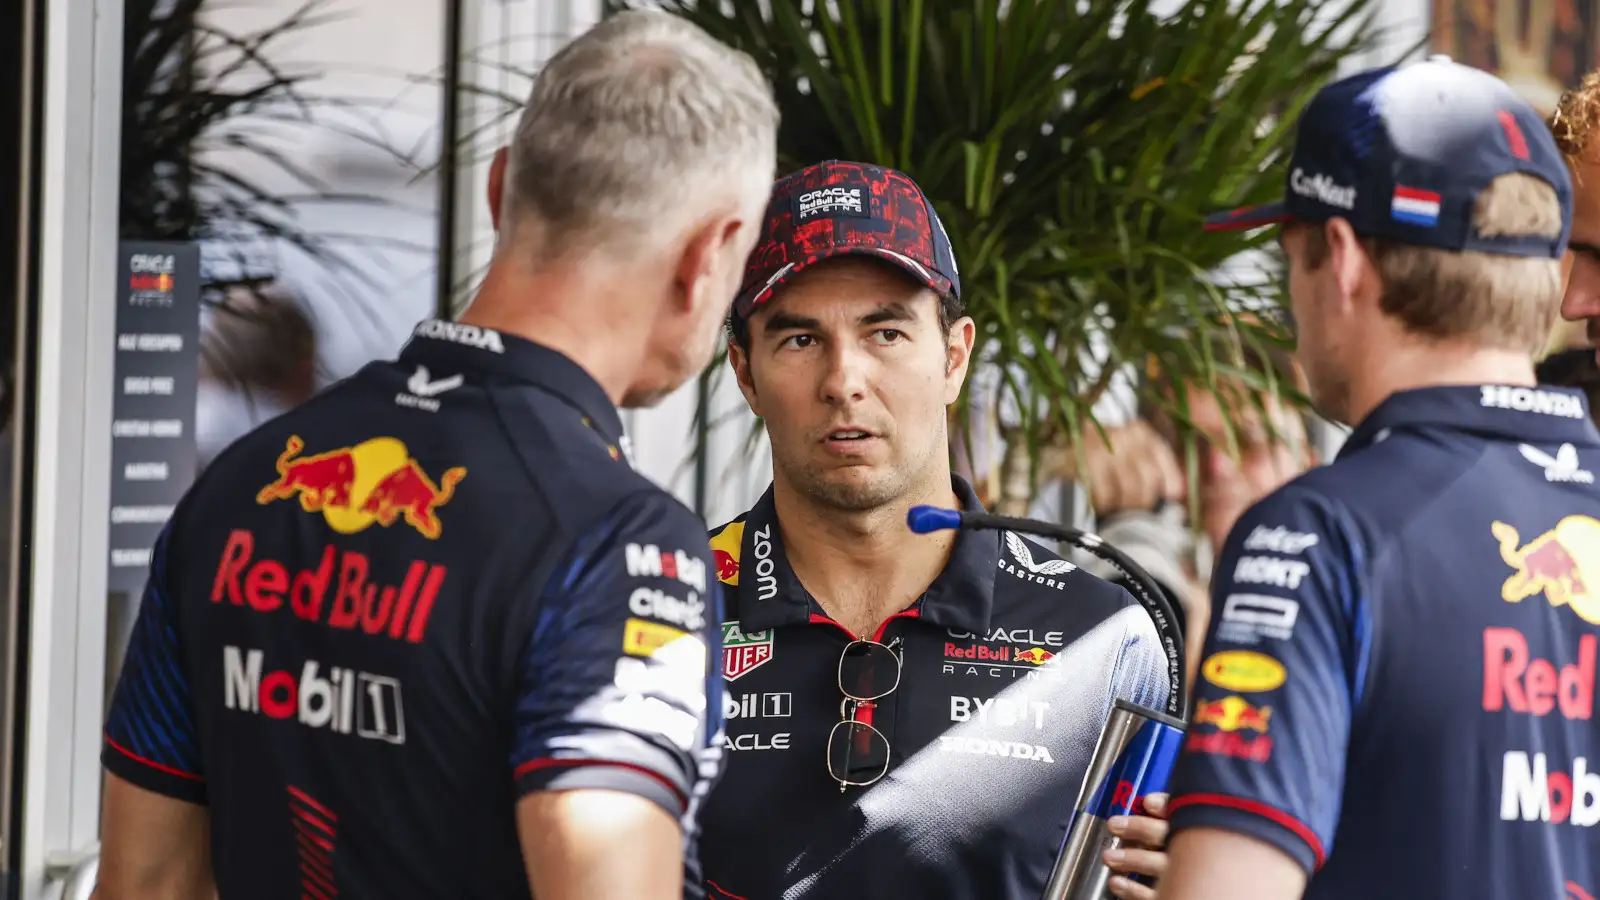 Sergio Perez speaking with Max Verstappen and Red Bull team manager Jonathan Wheatley.